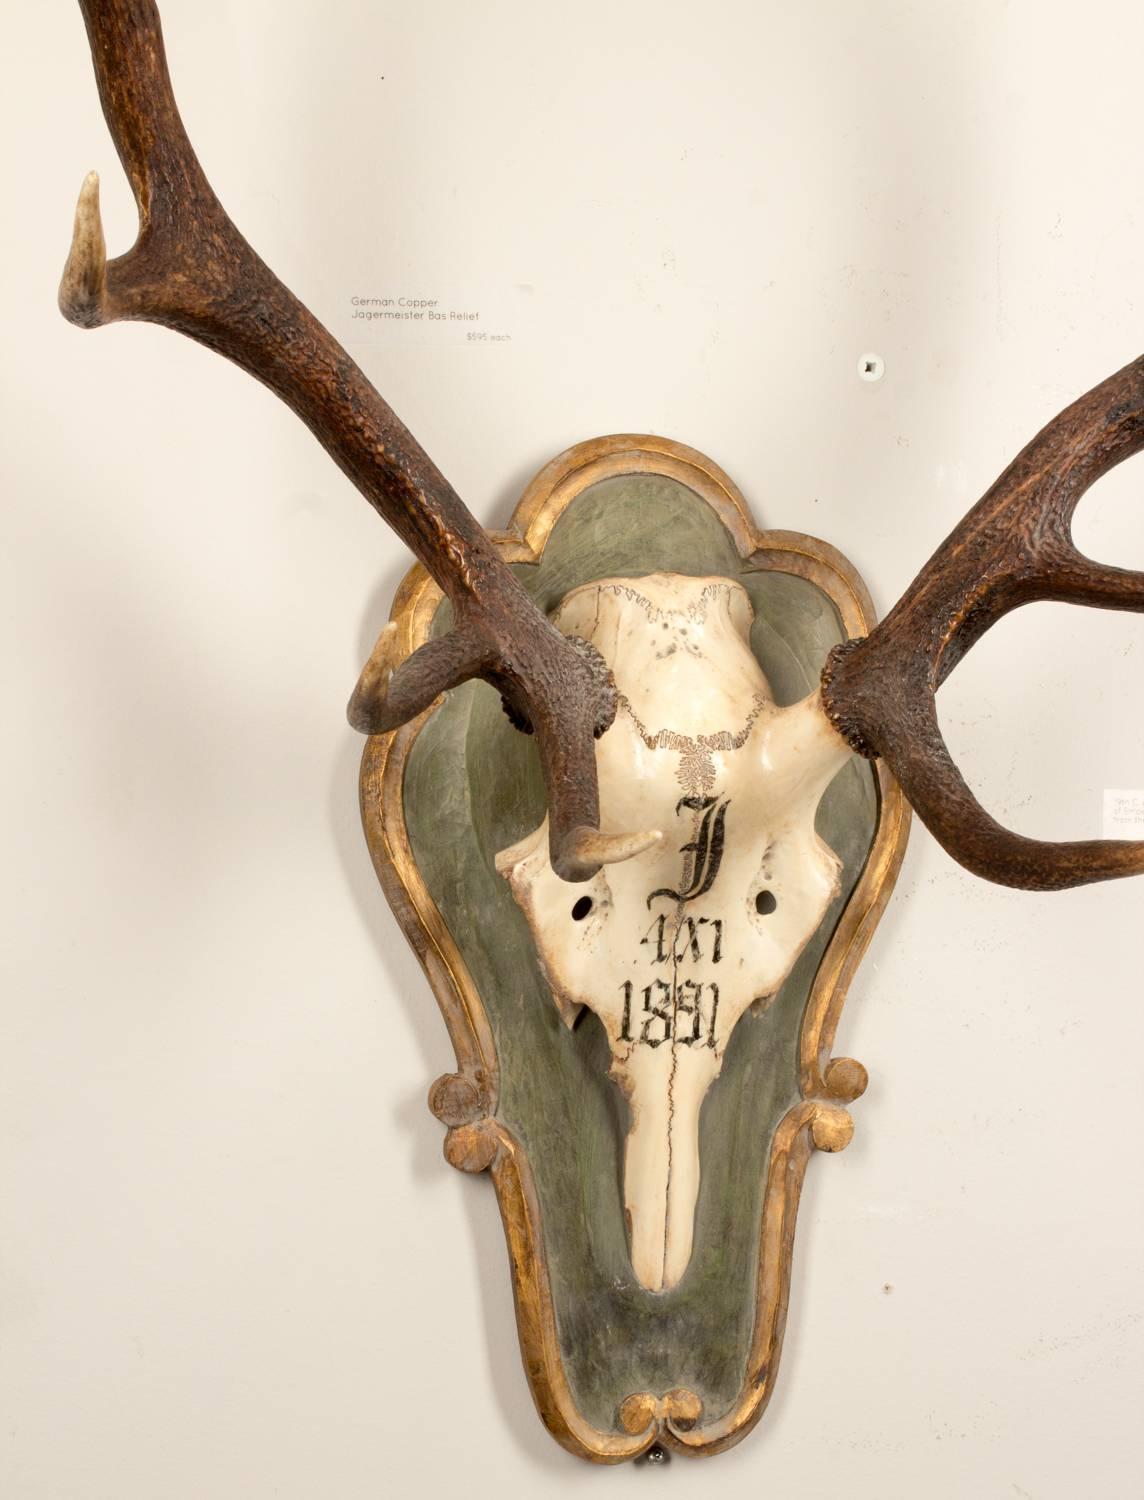 One of two antique Red Stag hunt trophies believed to have been taken by Emperor Franz Joseph of Austria during his time at the Kaiservilla, the former summer capital of the great Austro-Hungarian monarchy in the village of Bad Ischl. Beautiful